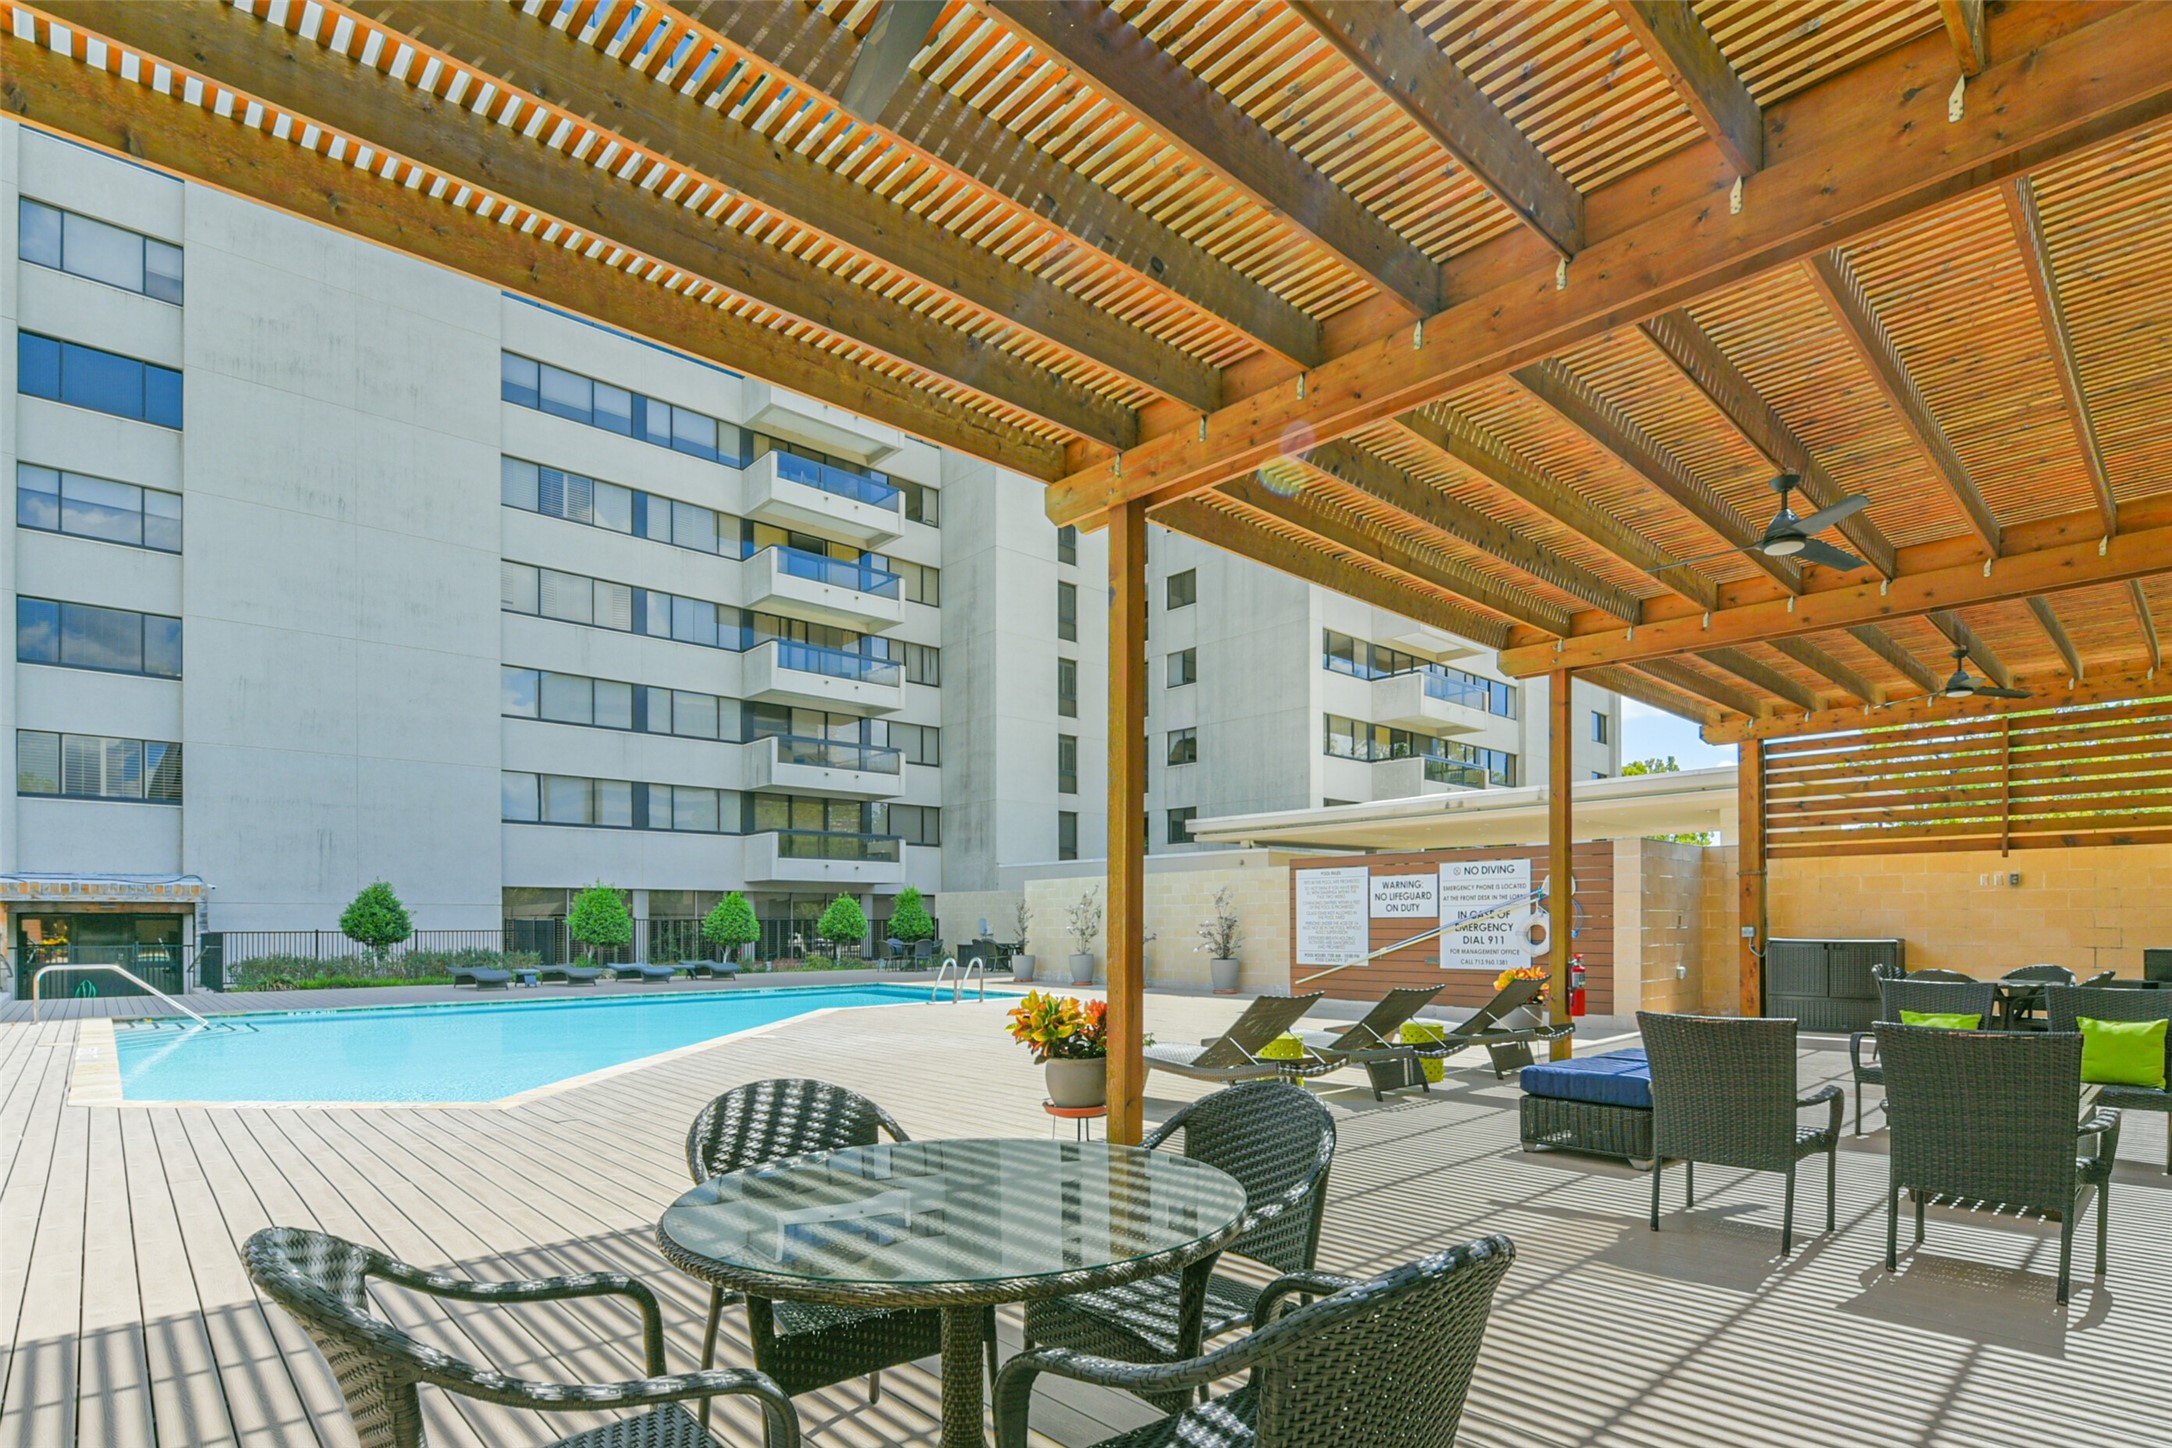 Relax and unwind at the community pool and sun deck also offers covered seating and outdoor dining area equipped with a convenient gas grill.